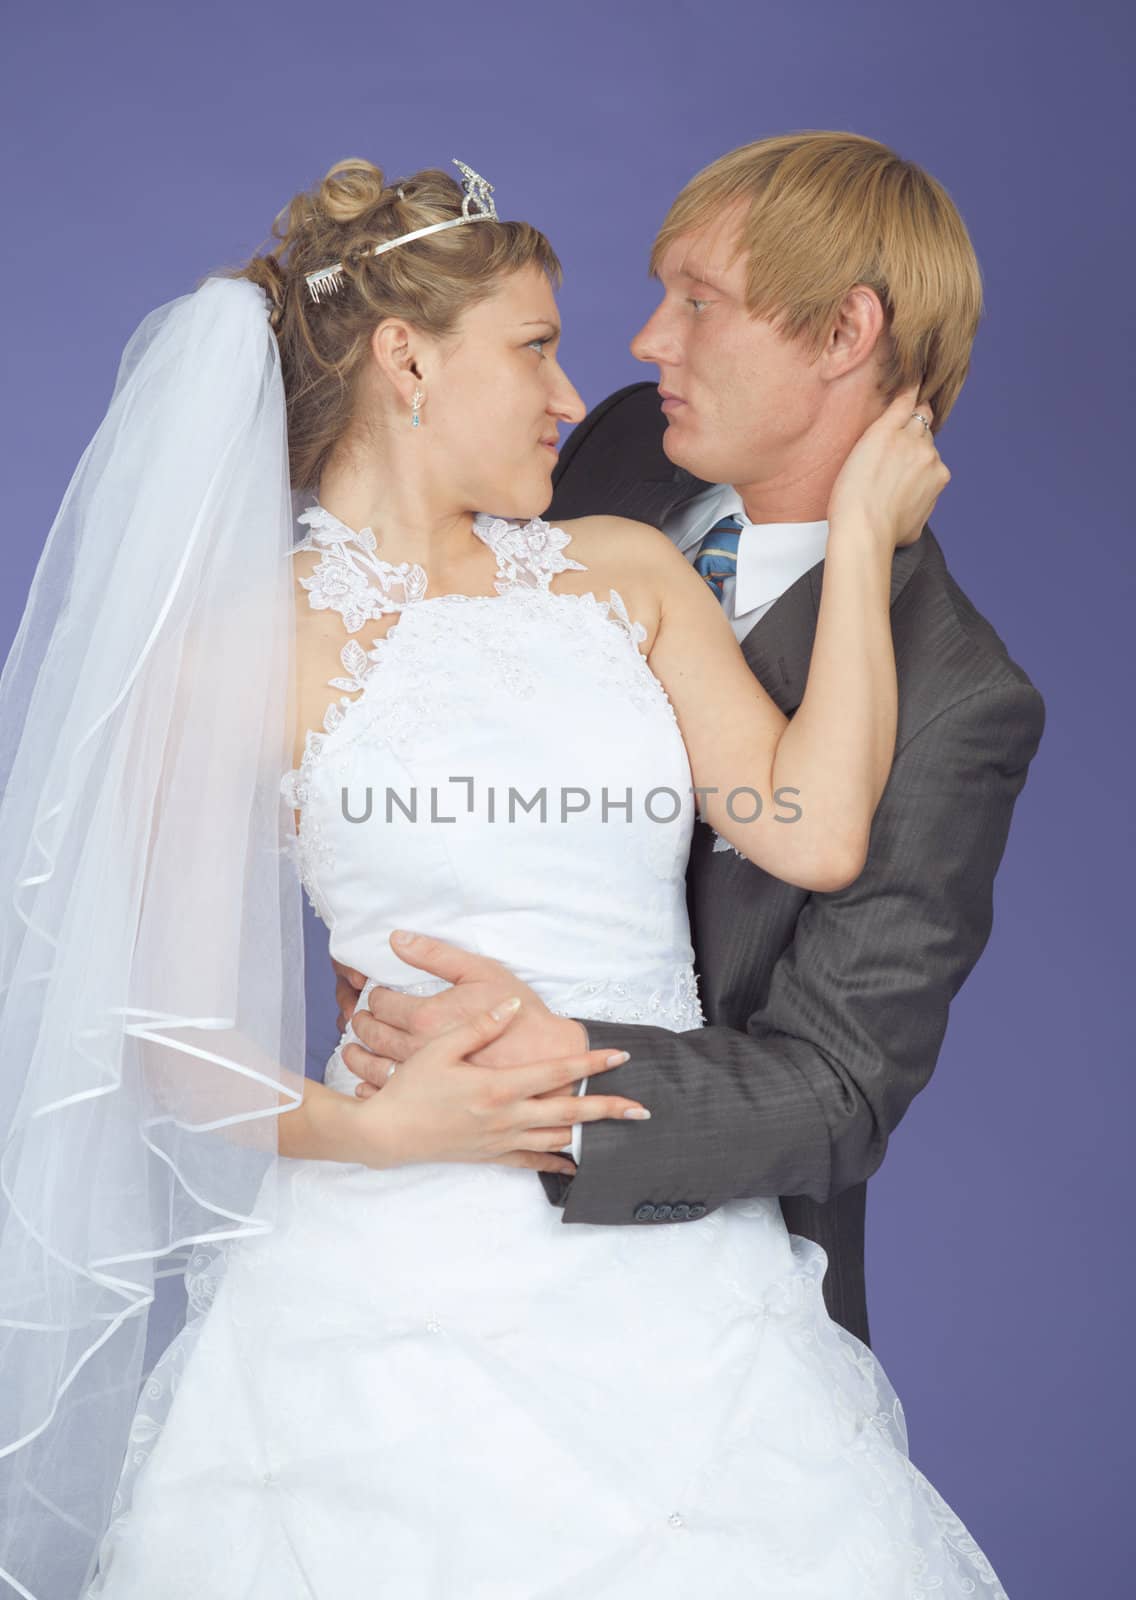 Romantic groom and the bride pose on a lilac background